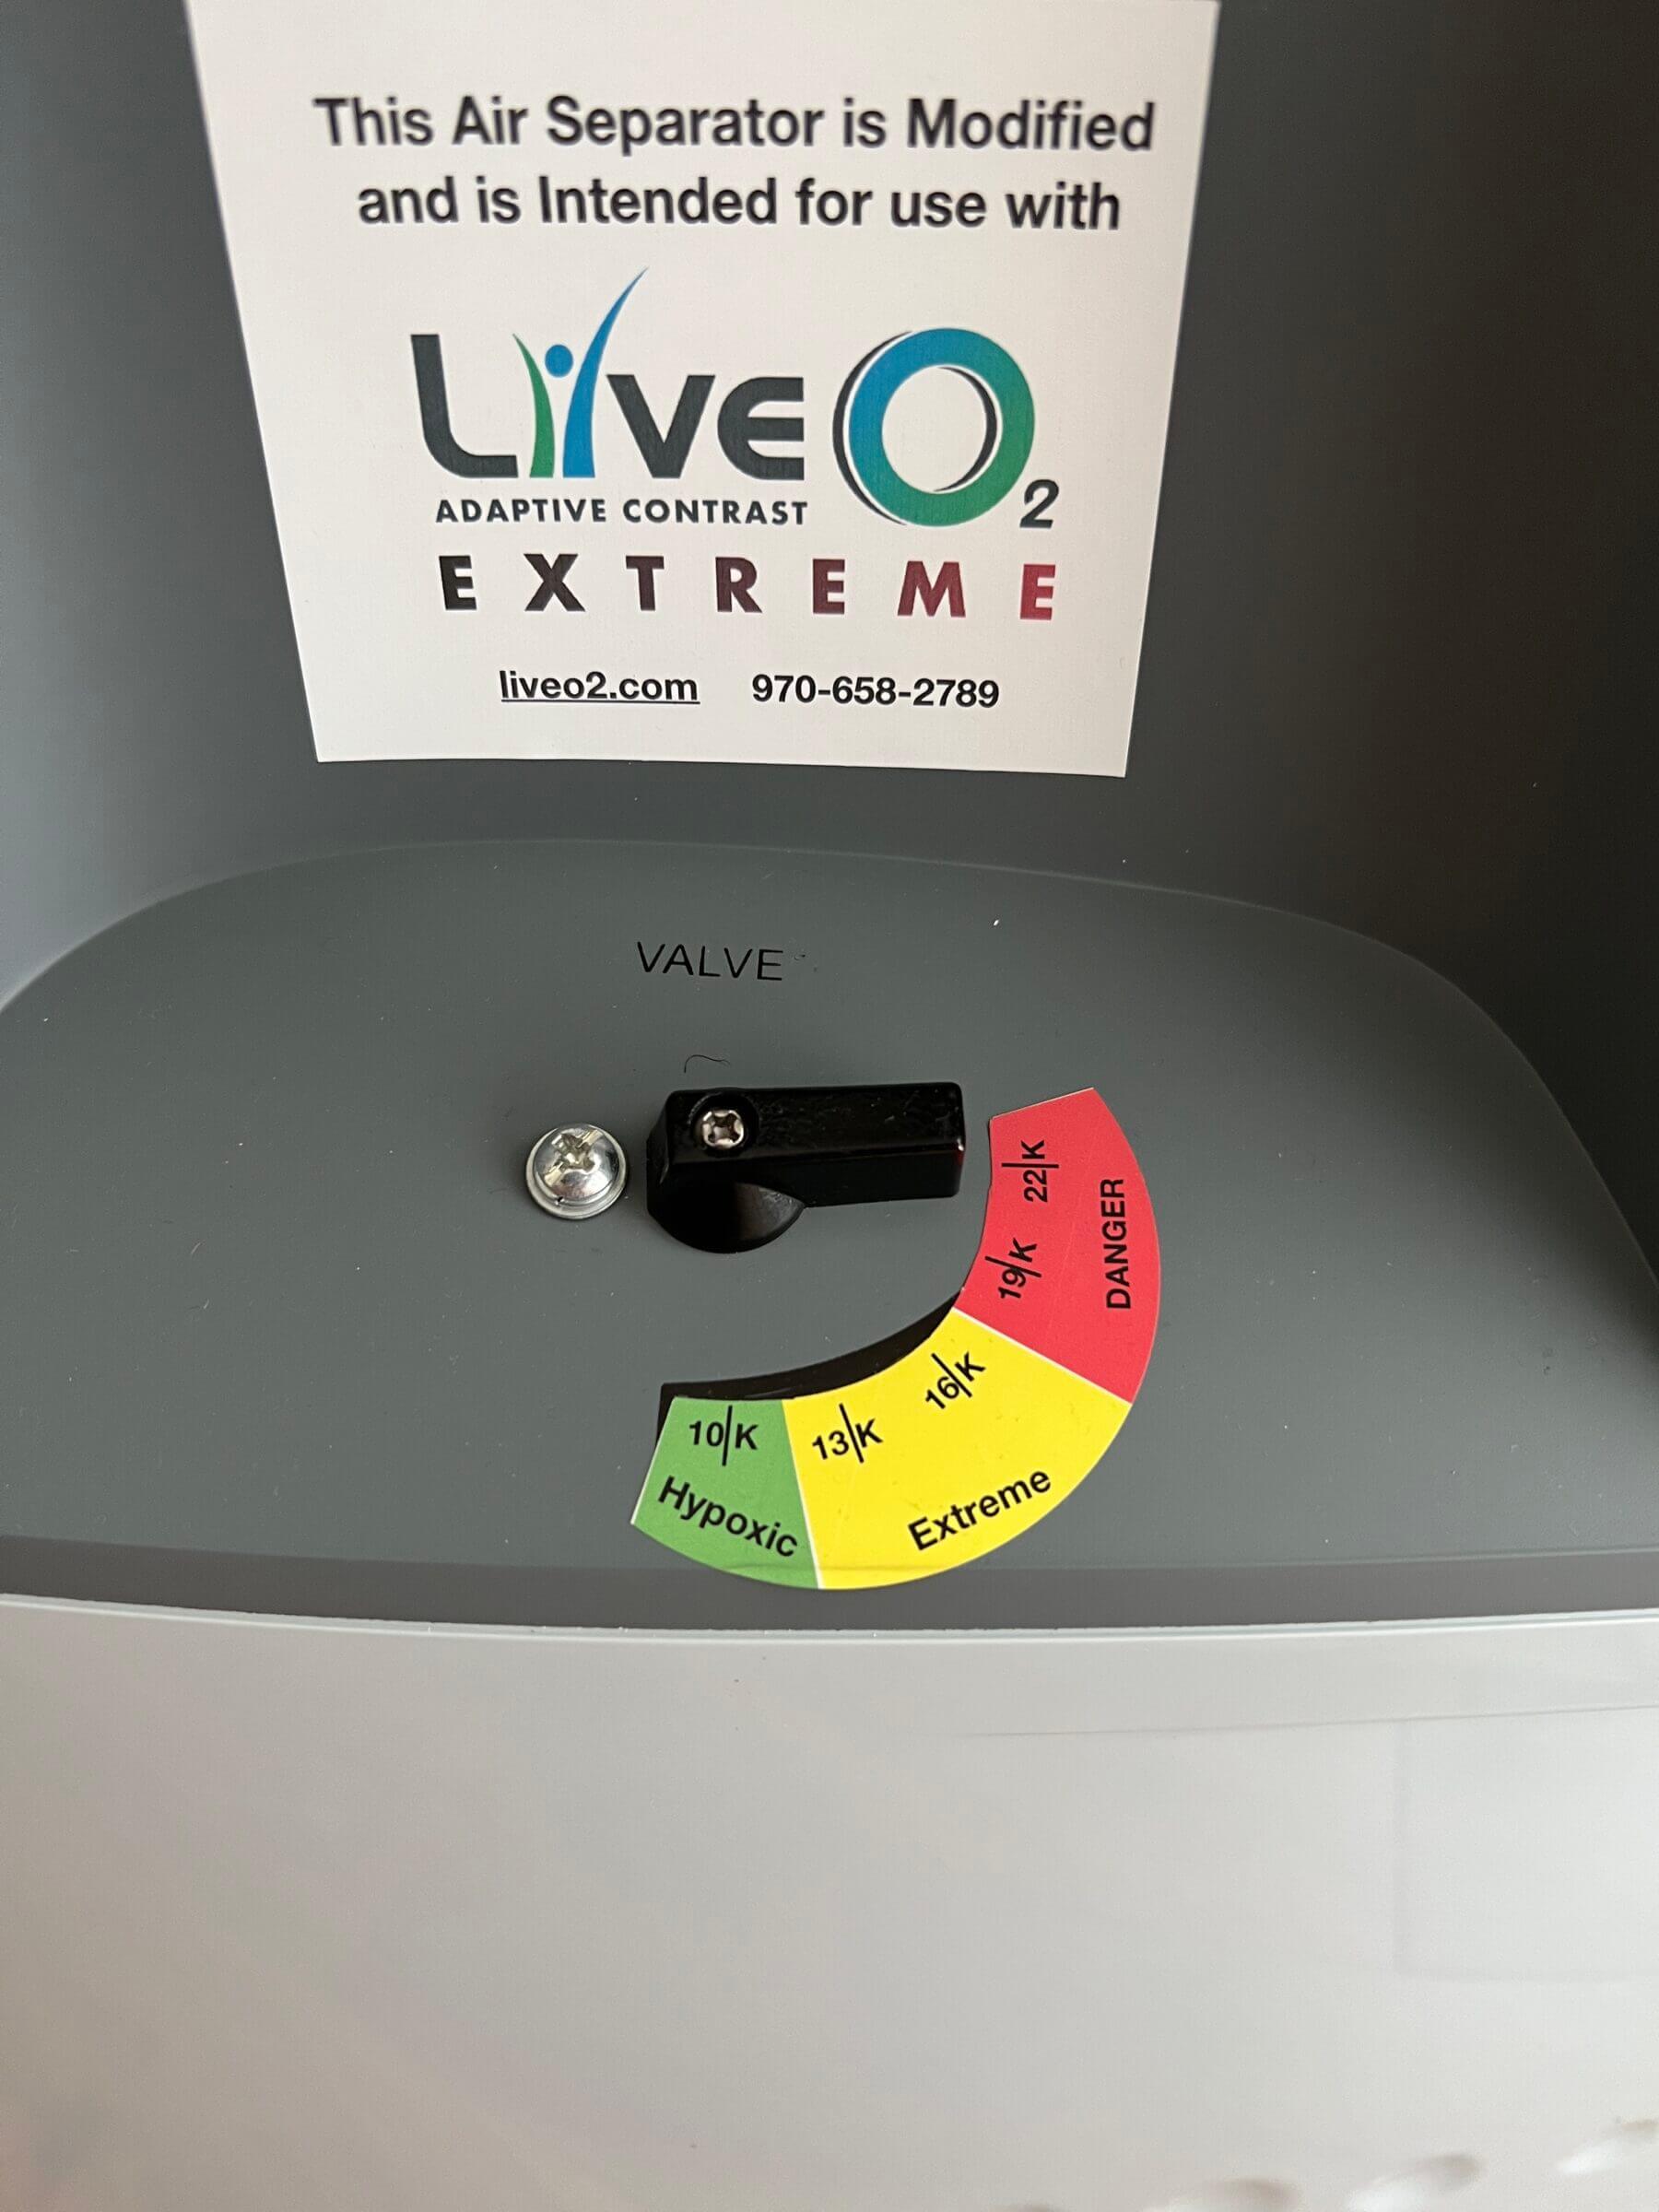 The oxygen concentrator of the LiveO2 Extreme allows you to select between different altitude settings.